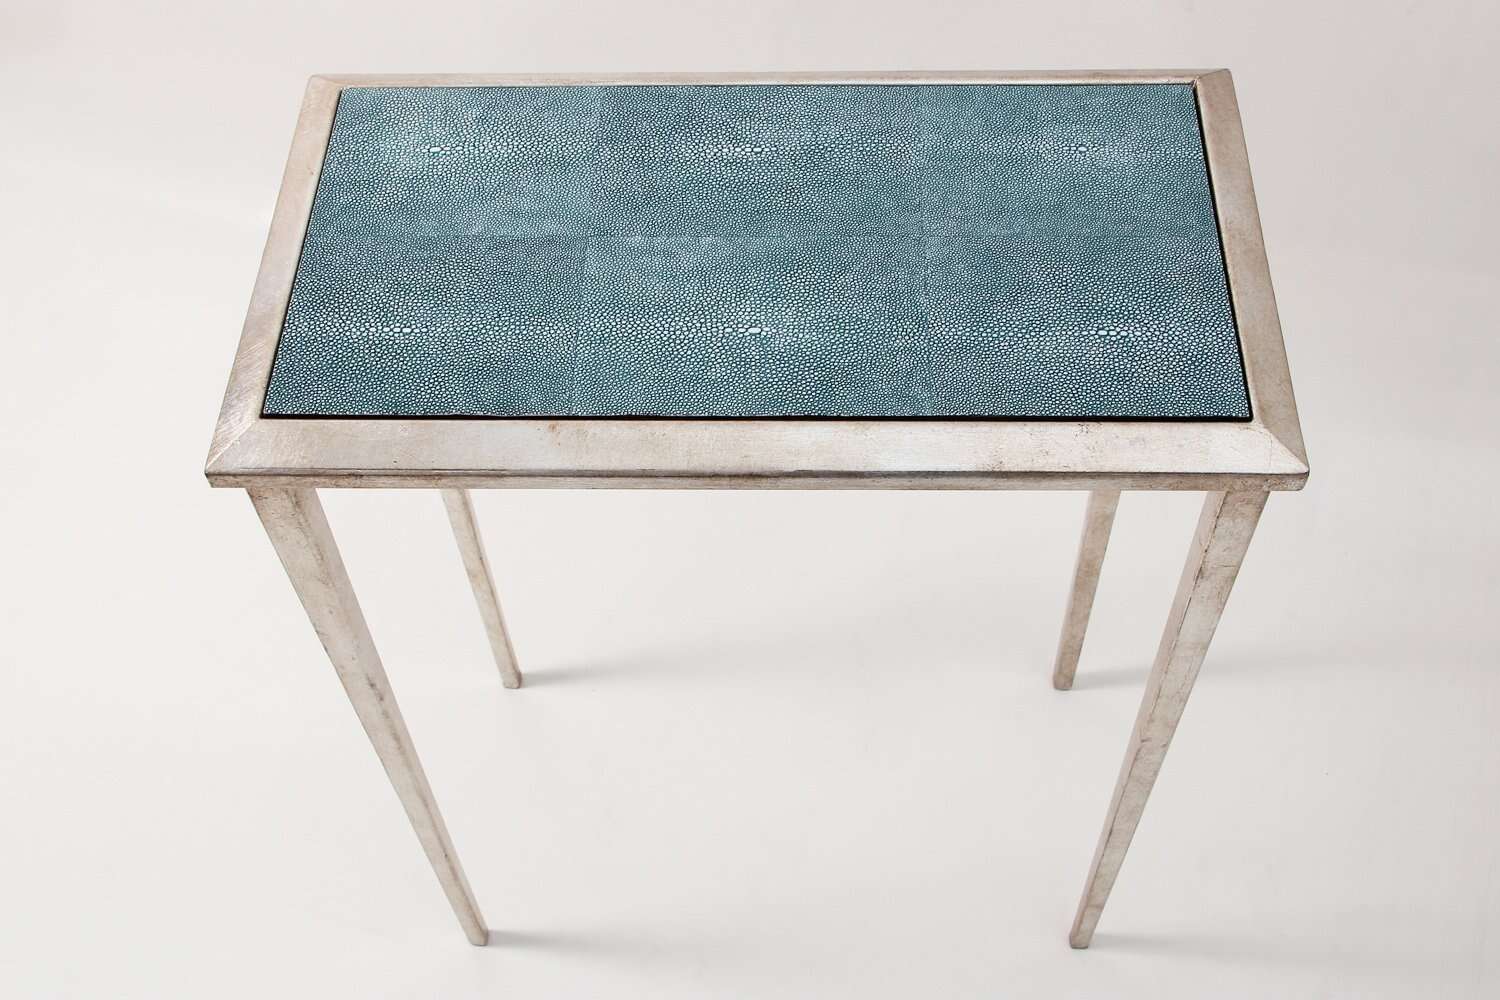 Lamp table Silver teal shagreen lamp table